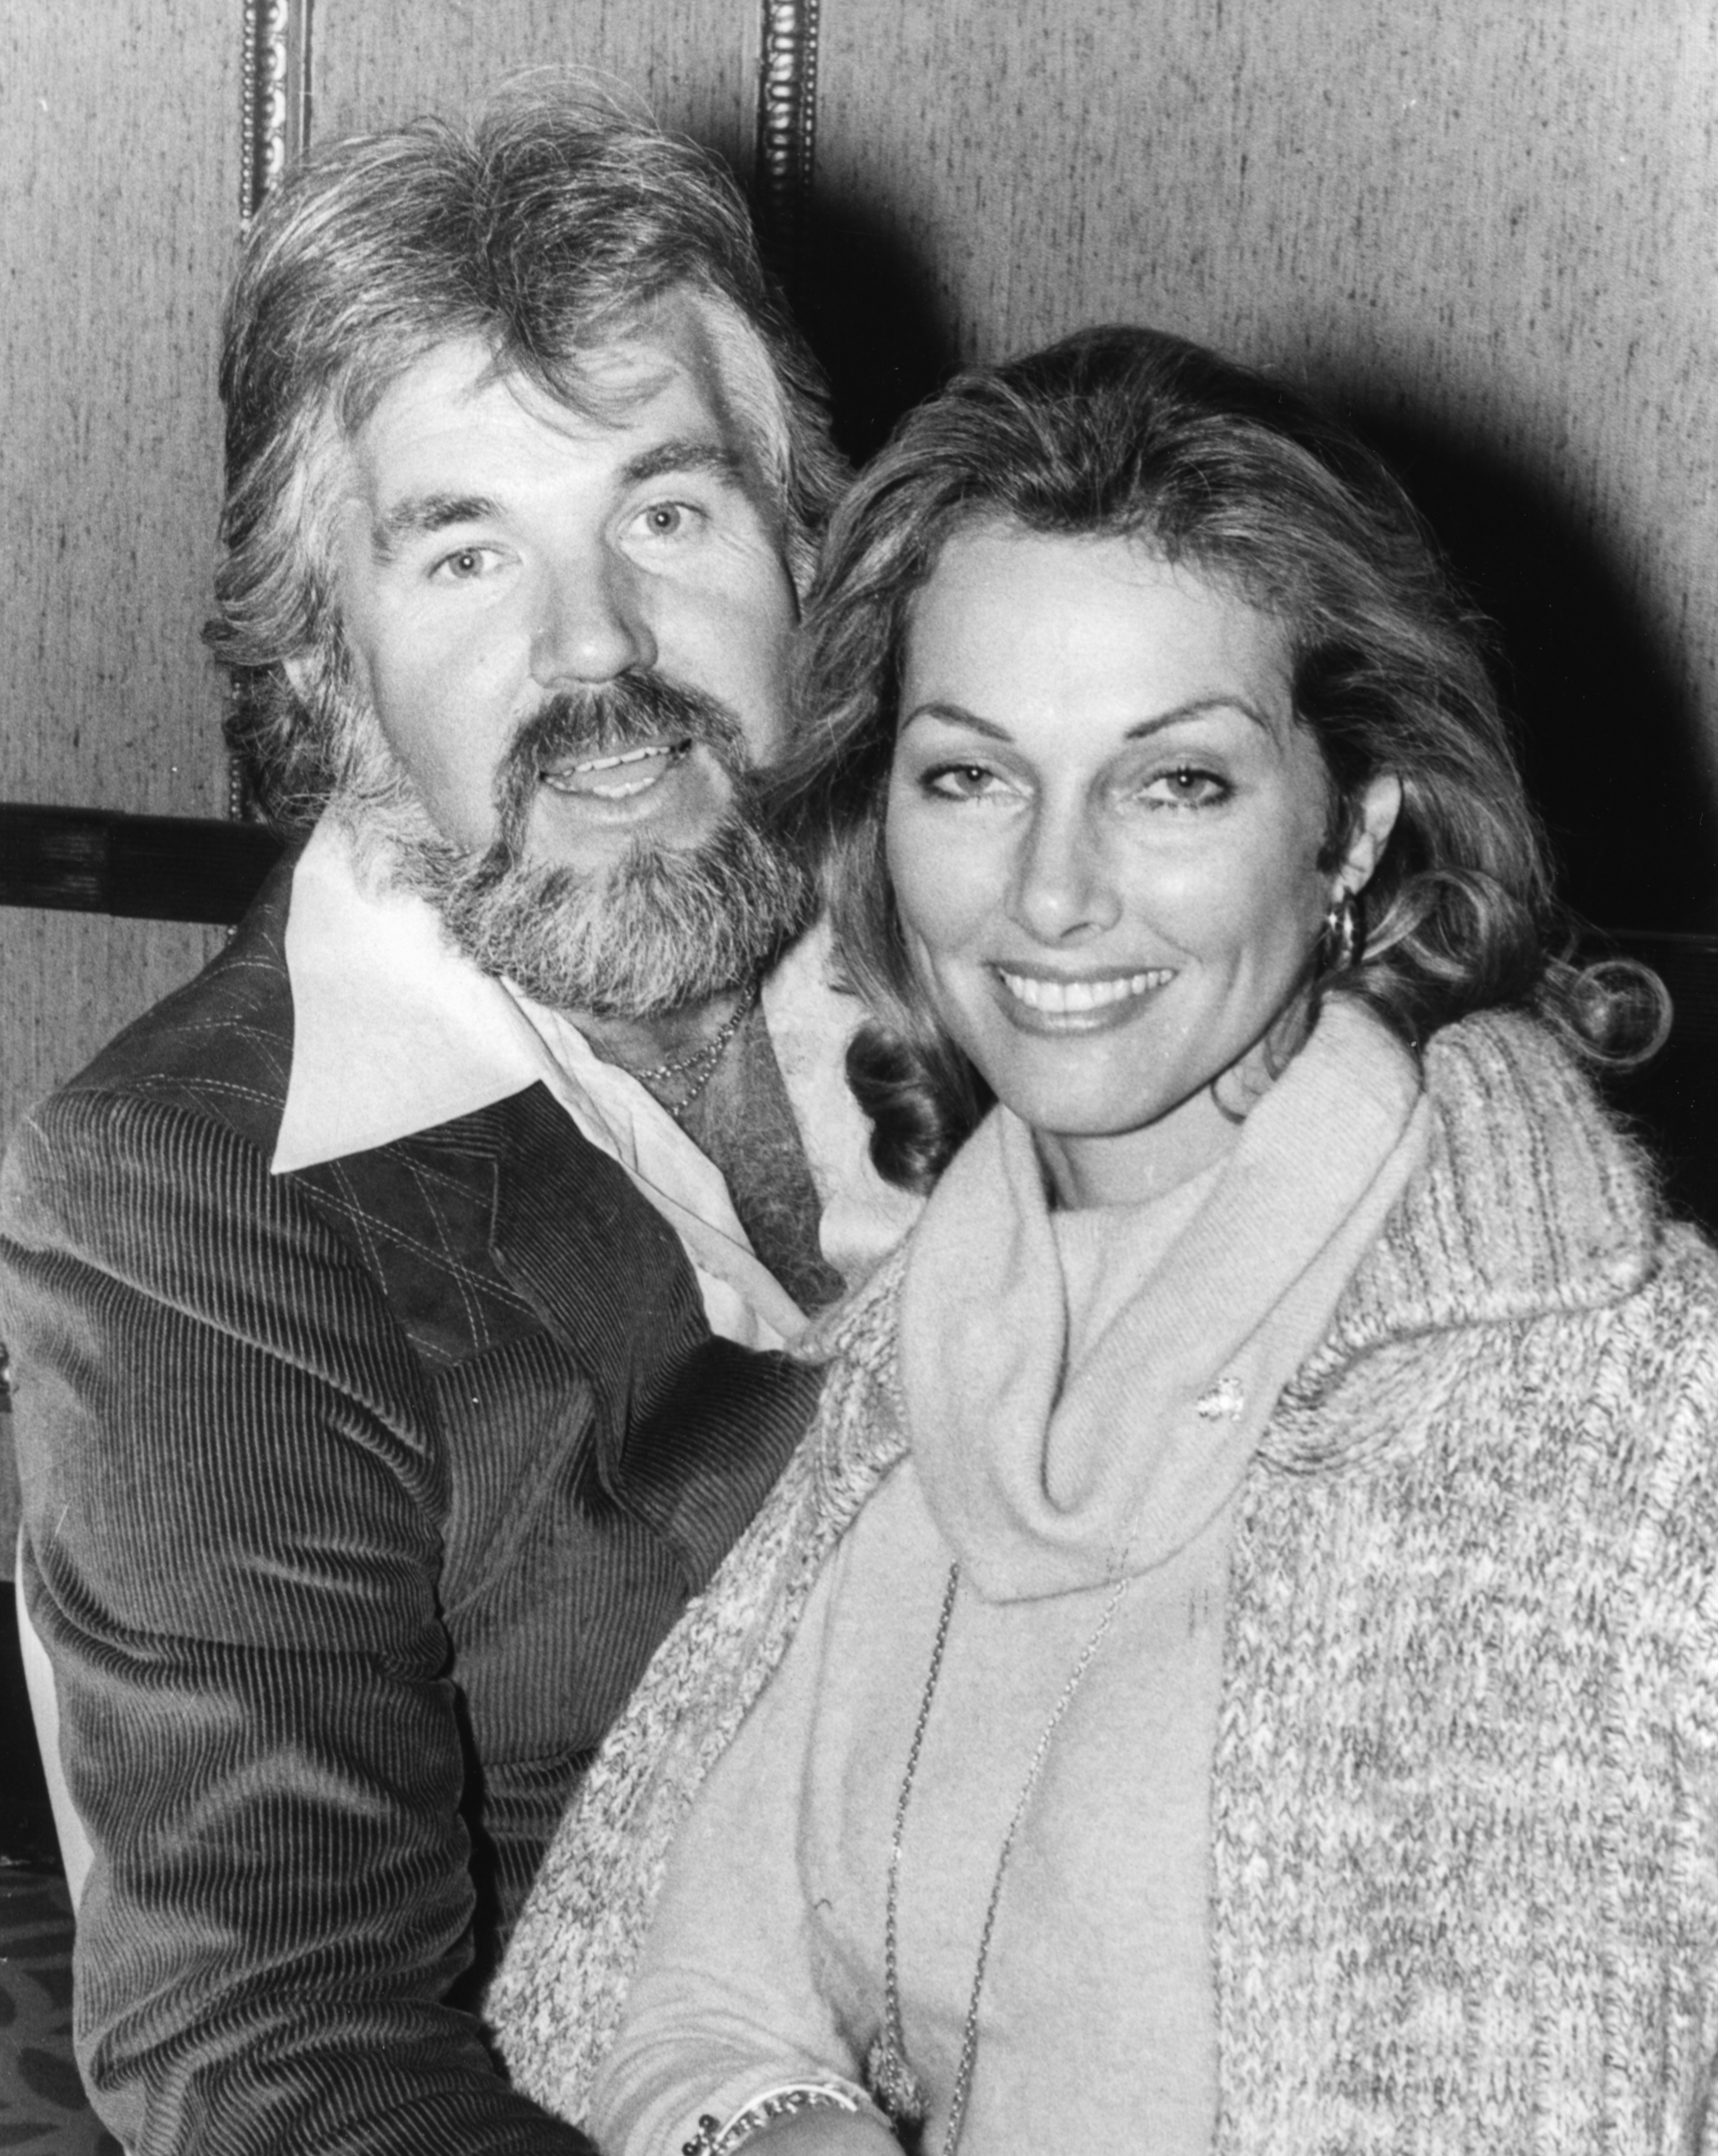 Kenny Rogers and Marianne Gordon in Britain on November 7, 1977 | Source: Getty Images